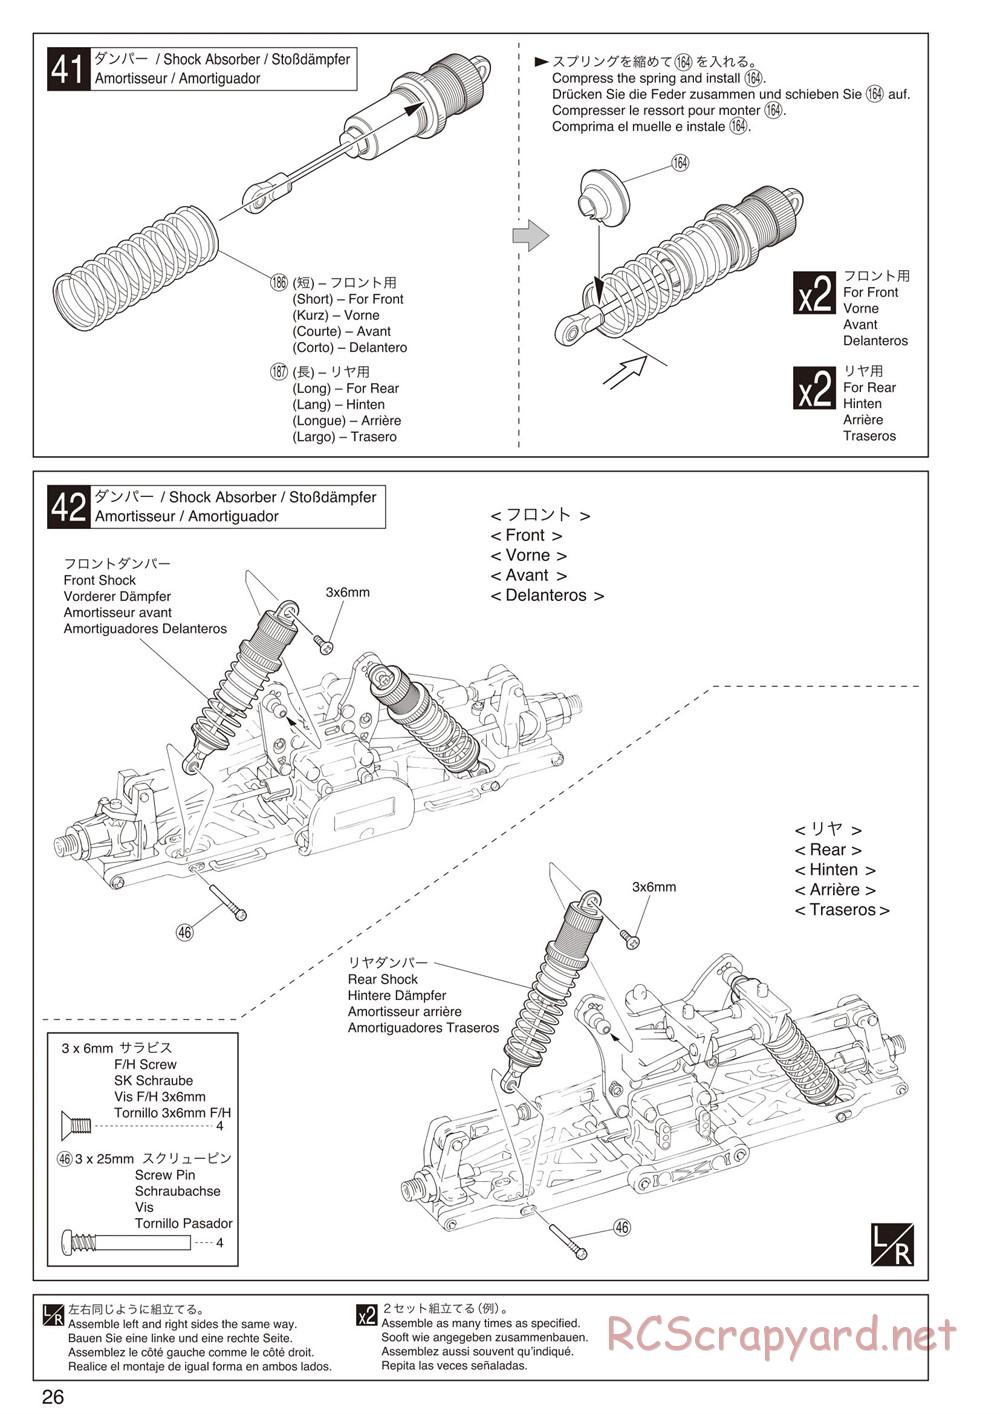 Kyosho - Inferno Neo 2.0 - Manual - Page 26